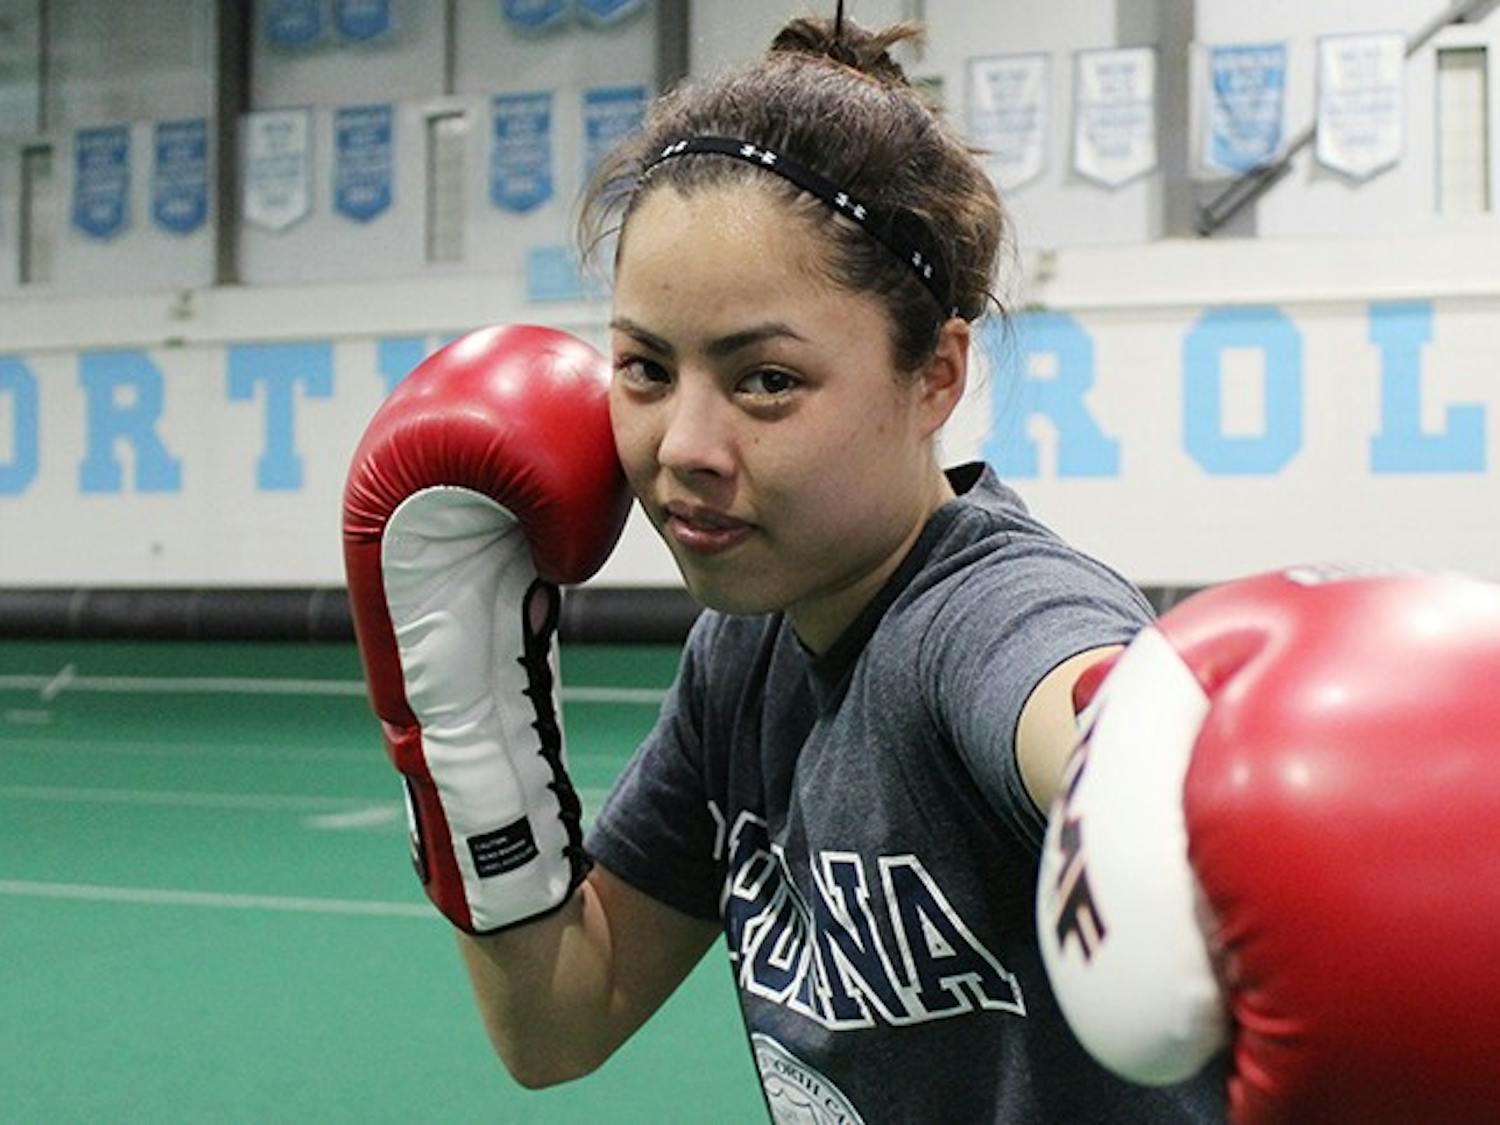 UNC Boxer and National Champion, Michelle Kern, posing after practice